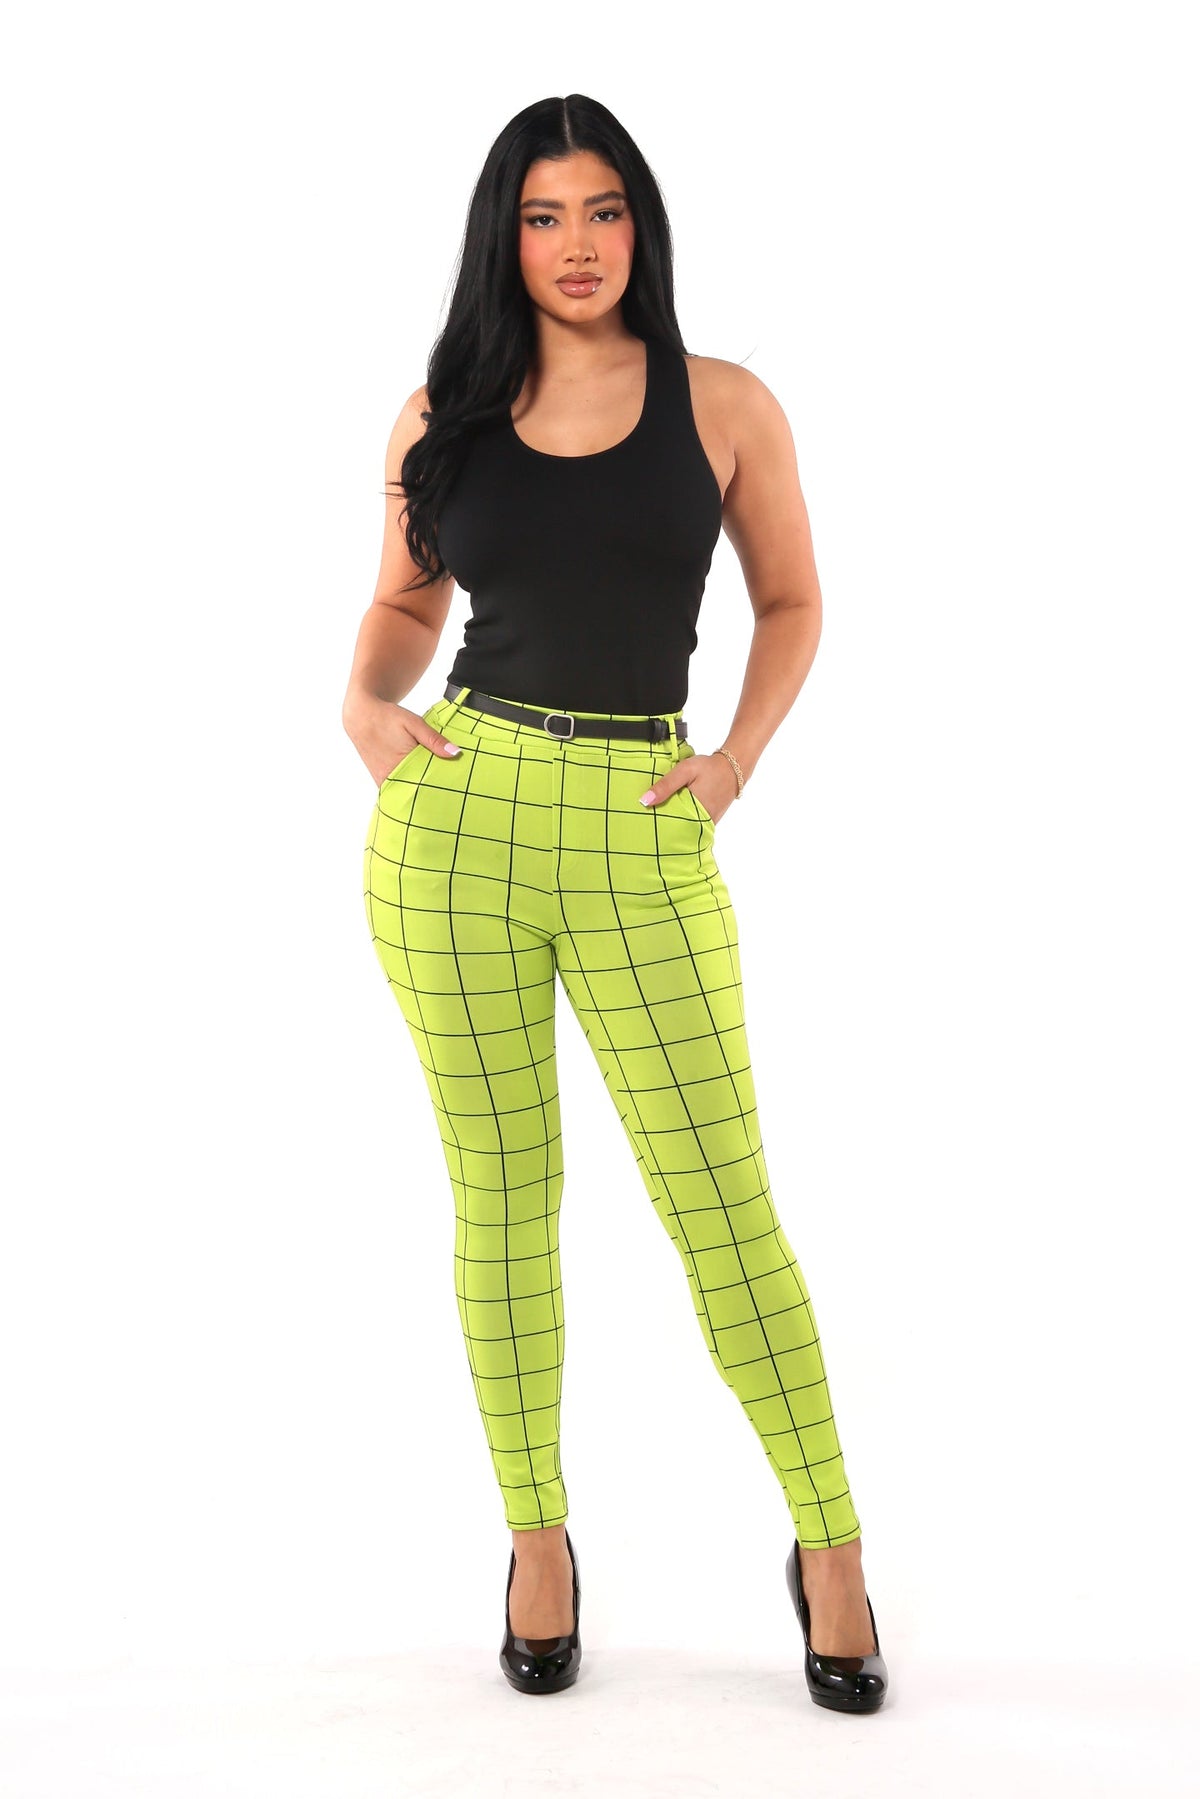 Wholesale Womens Sculpting Treggings With Faux Leather Belt - Green & Black Plaid - S&G Apparel